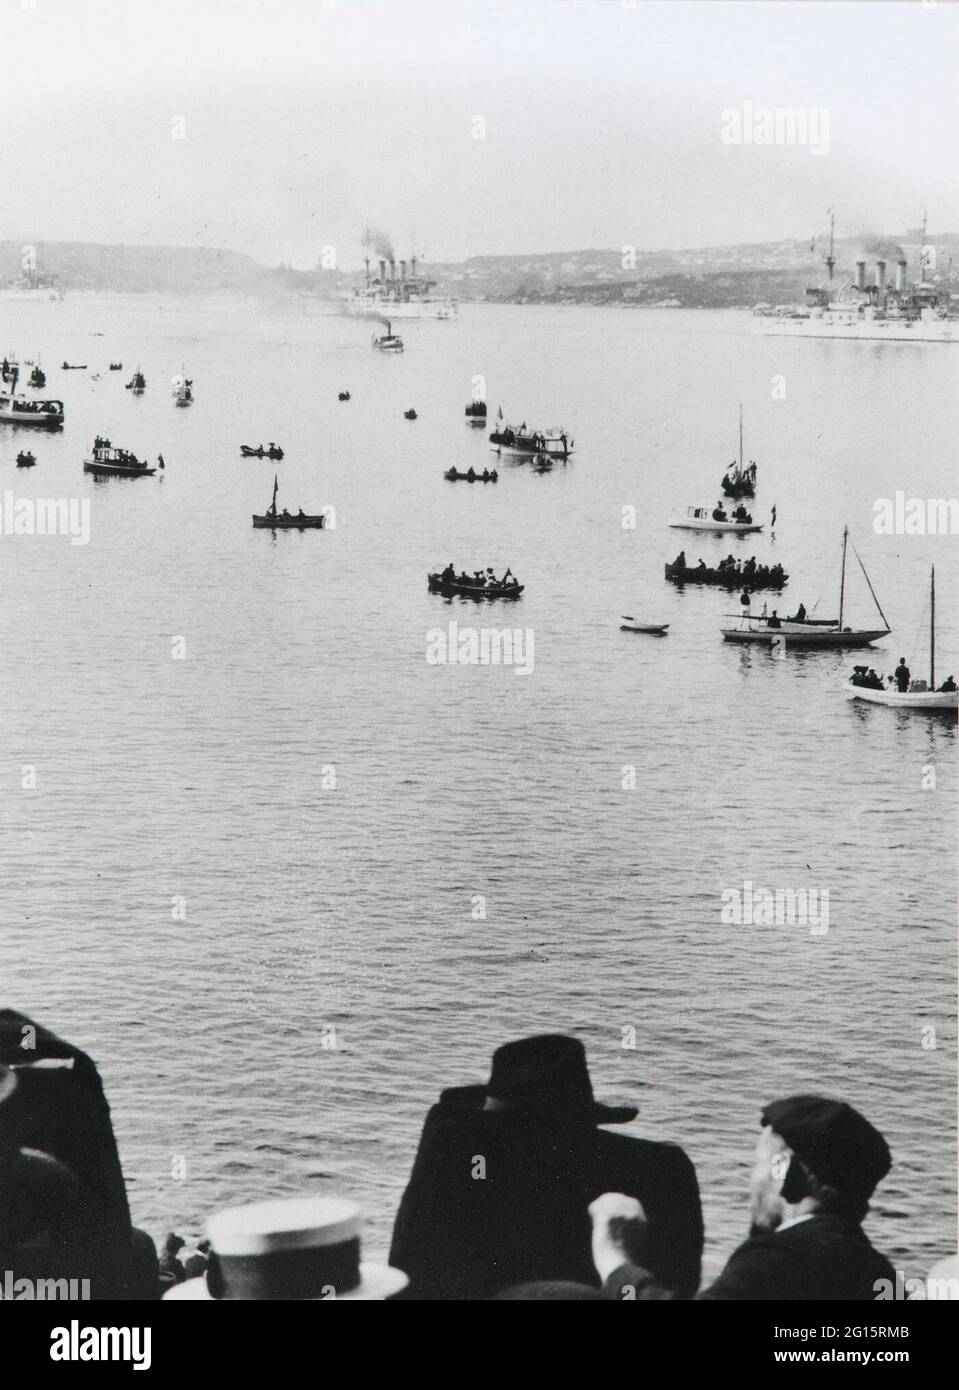 THE 1908 AMERICAN FLEET IN SYDNEY HARBOUR *** Local Caption *** PHOTOGRAPH  THE 1908 AMERICAN FLEET IN SYDNEY HARBOUR  Photograph.  Untitled (the 1908 american fleet to sydney harbour).  Sydney, australia, 1908.  Silver gelatin print, paper.  The black and white image depicts the Great White Fleet in sydney harbour steaming past crowds of spectators.  The fleet appears at upper c. People watch the fleet from small craft, longboats and skiffs, at c.  The heads of several people appear at l.L. Corner and bot. C. Perhaps watching the fleet from a ship. Stock Photo